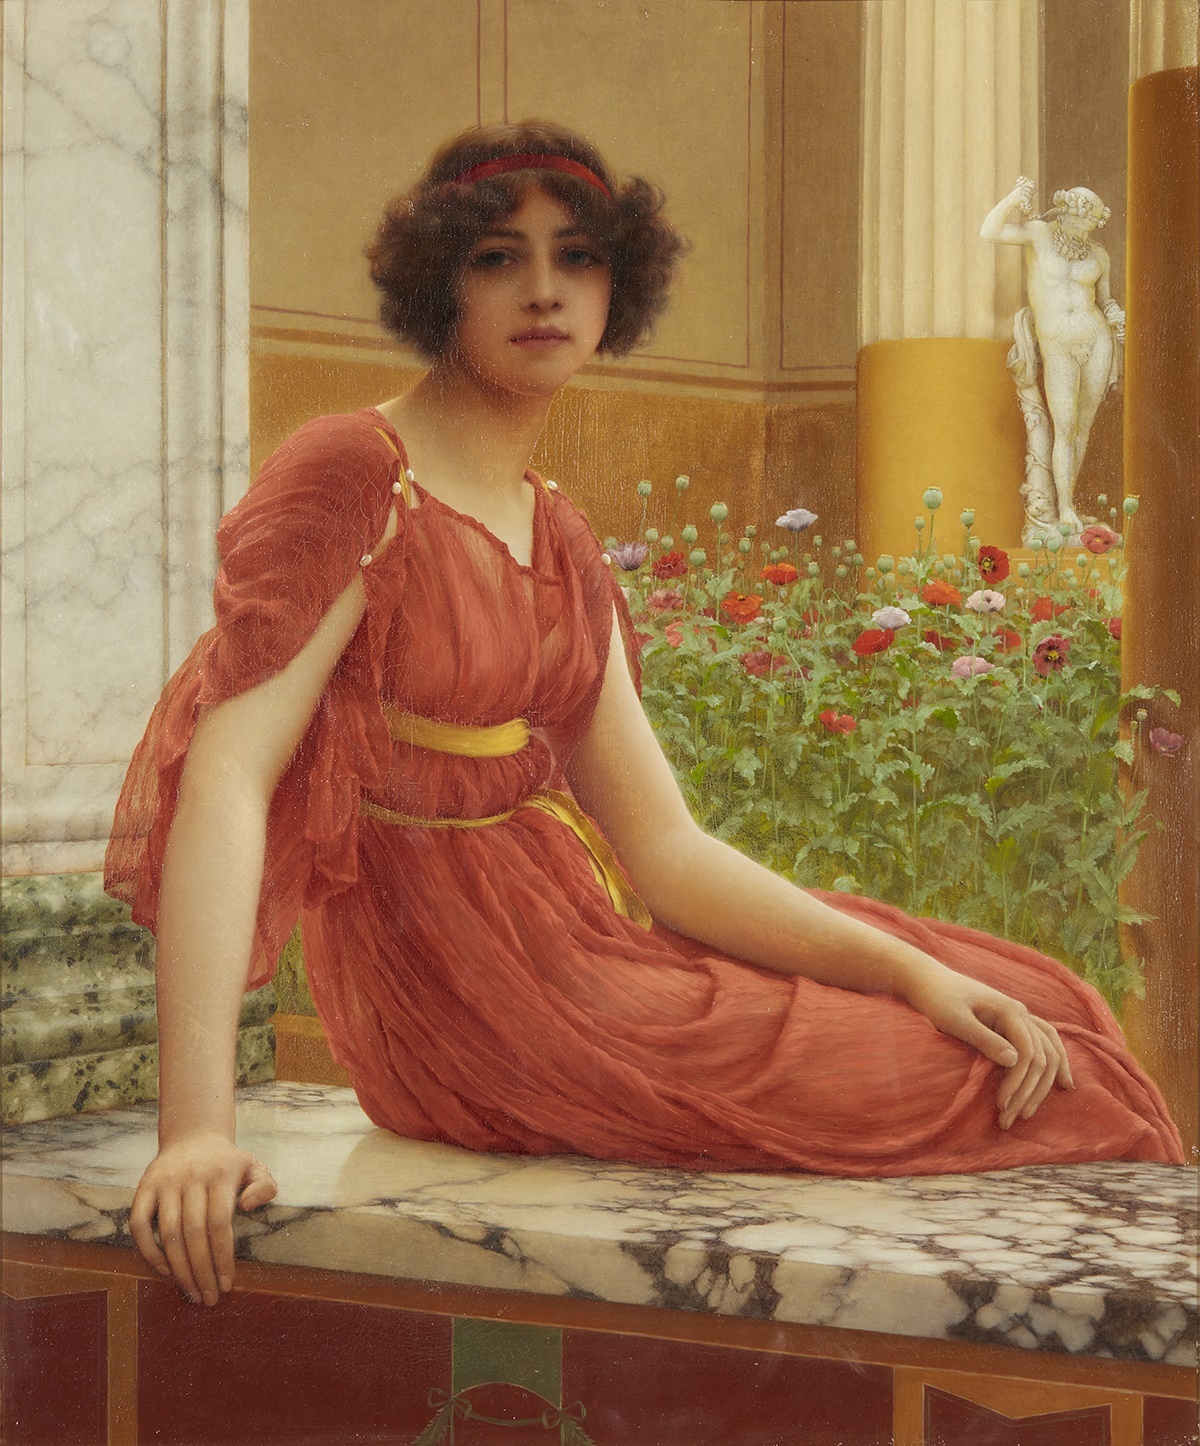 John William Godward painting sold for £447,000 at auction